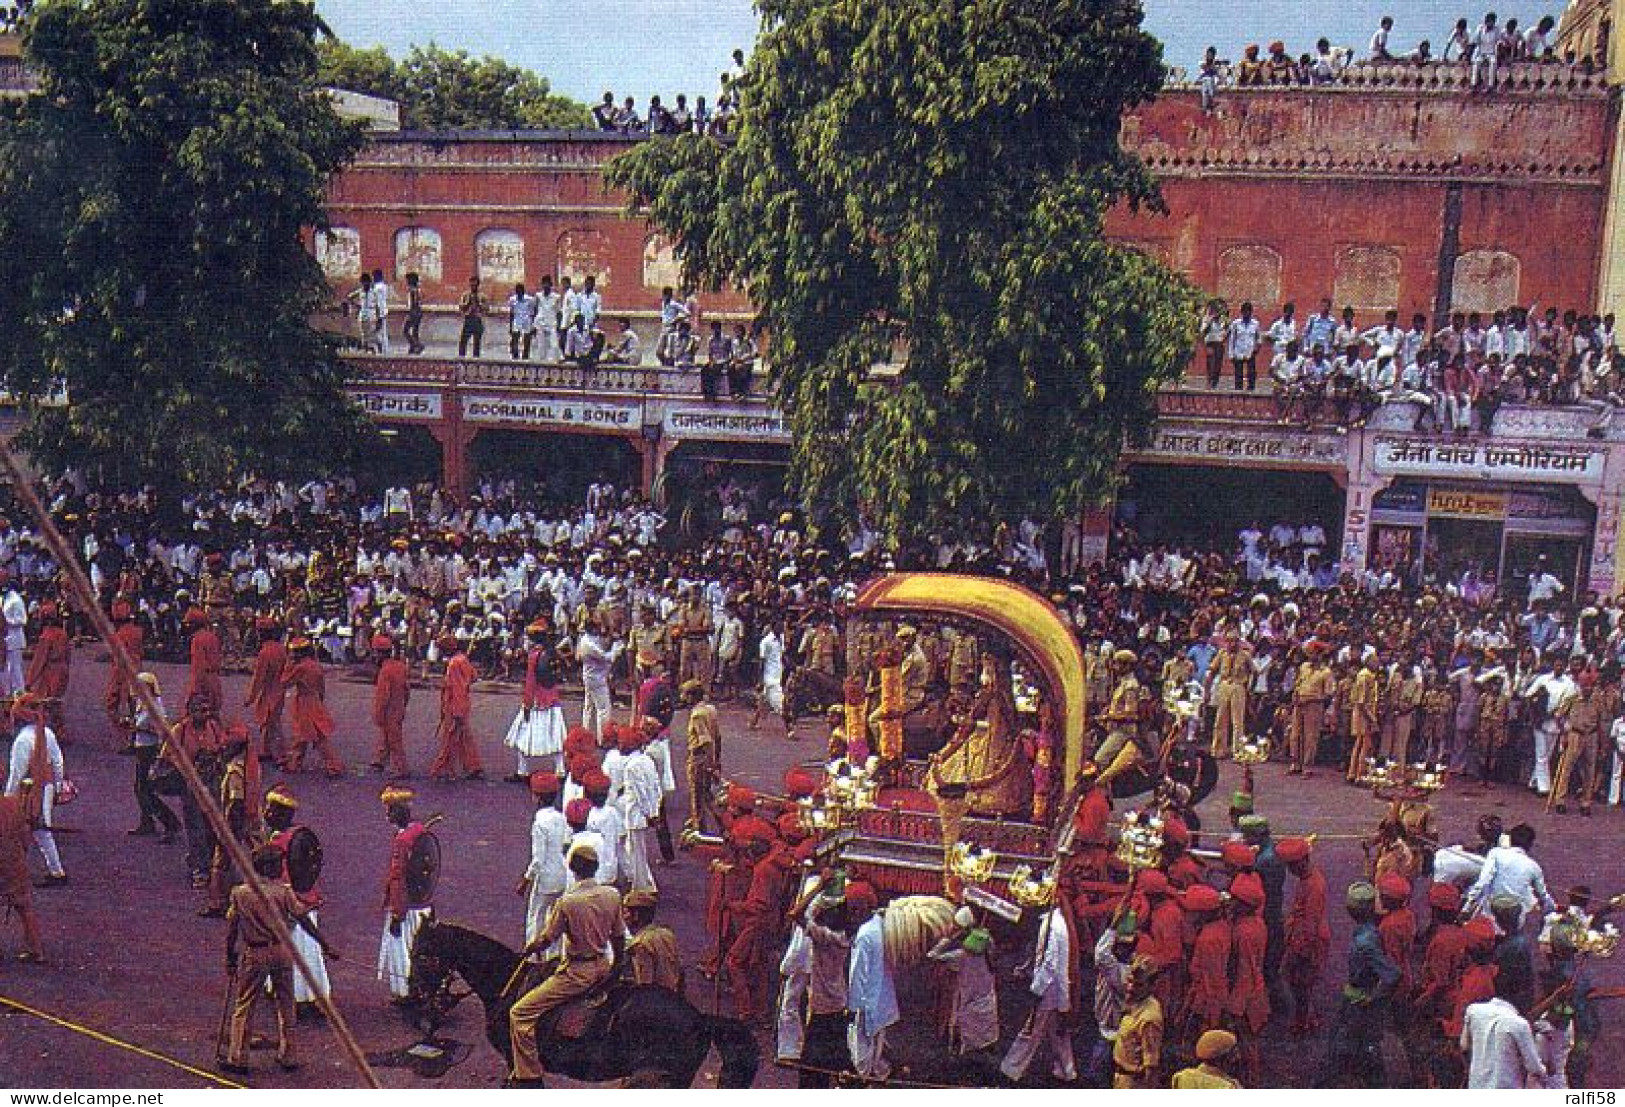 1 AK Indien * Image Of Goddess Parvati (Lord Shiva) Being Taken Out In A Procession During The Teej Festival At Jaipur * - Inde